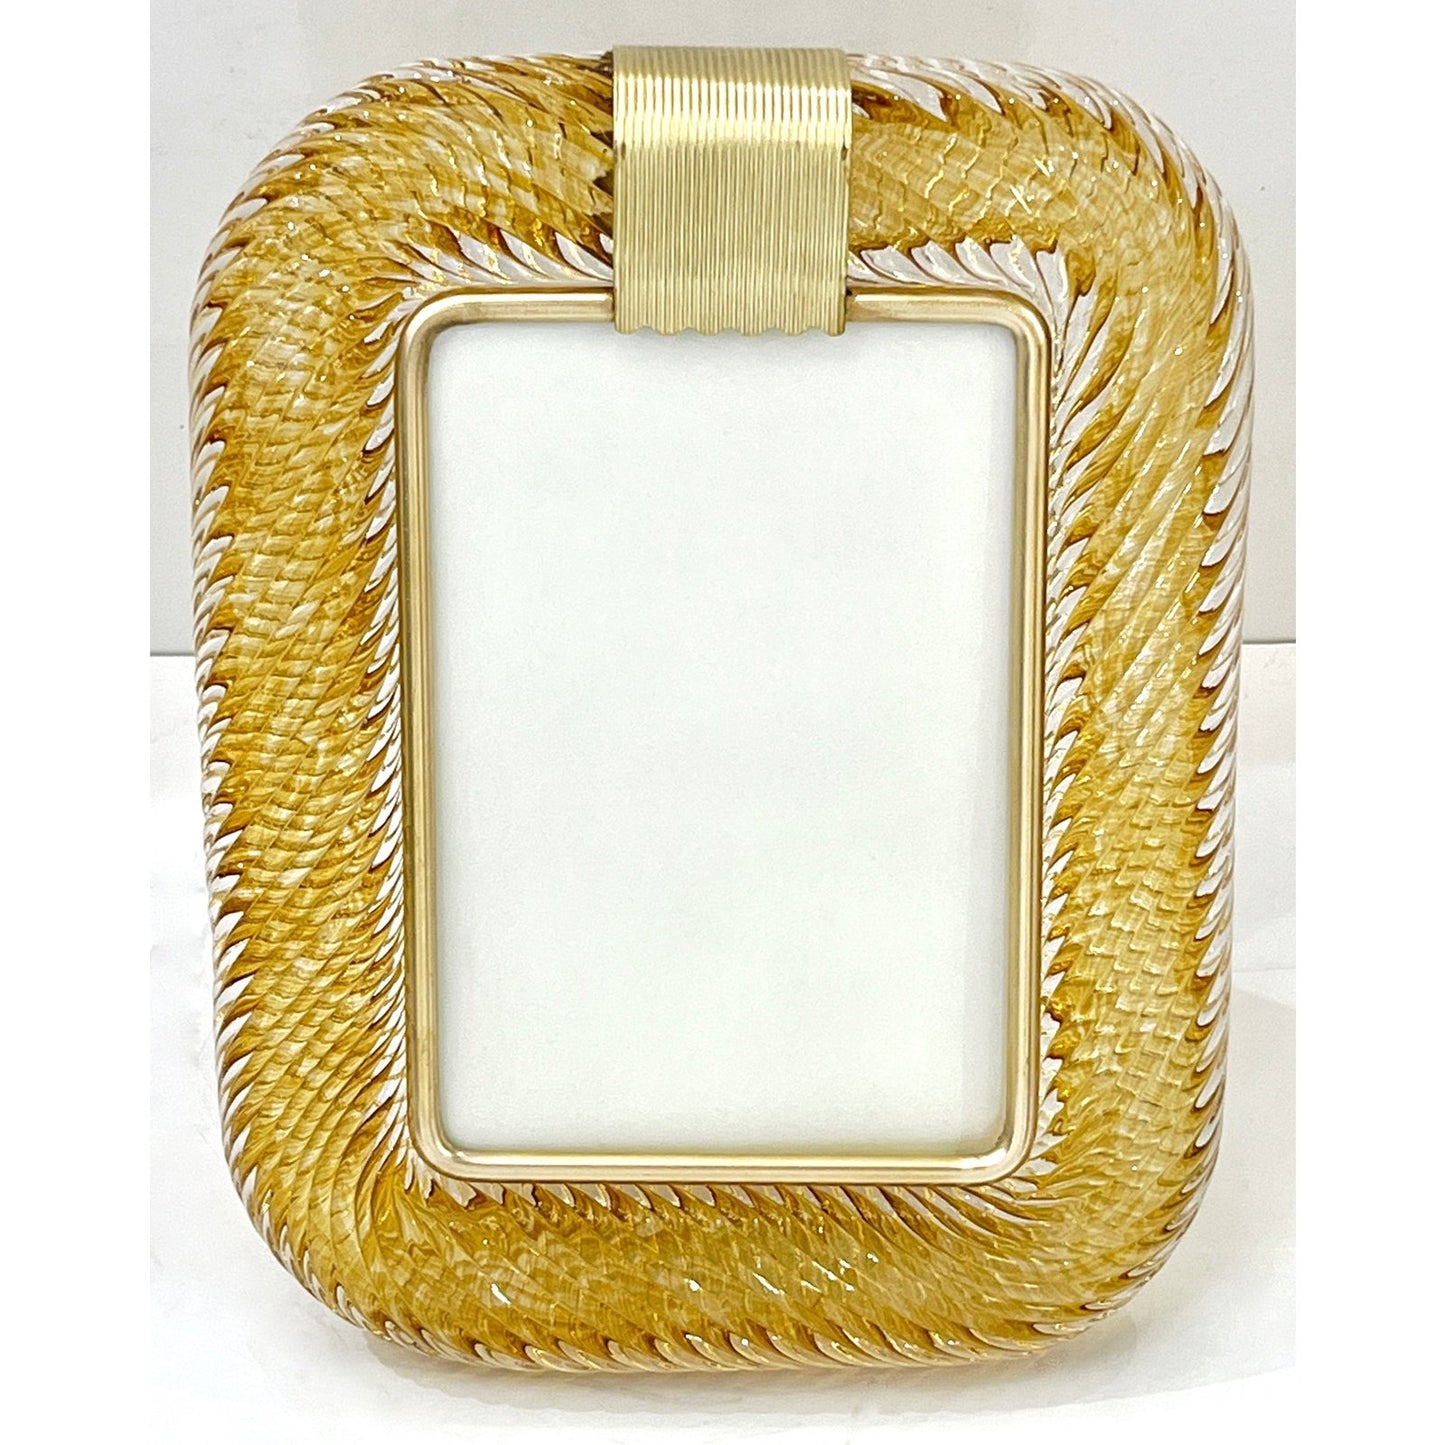 2000 Barovier Toso Italian Gold Crystal Twisted Murano Glass Brass Picture Frame